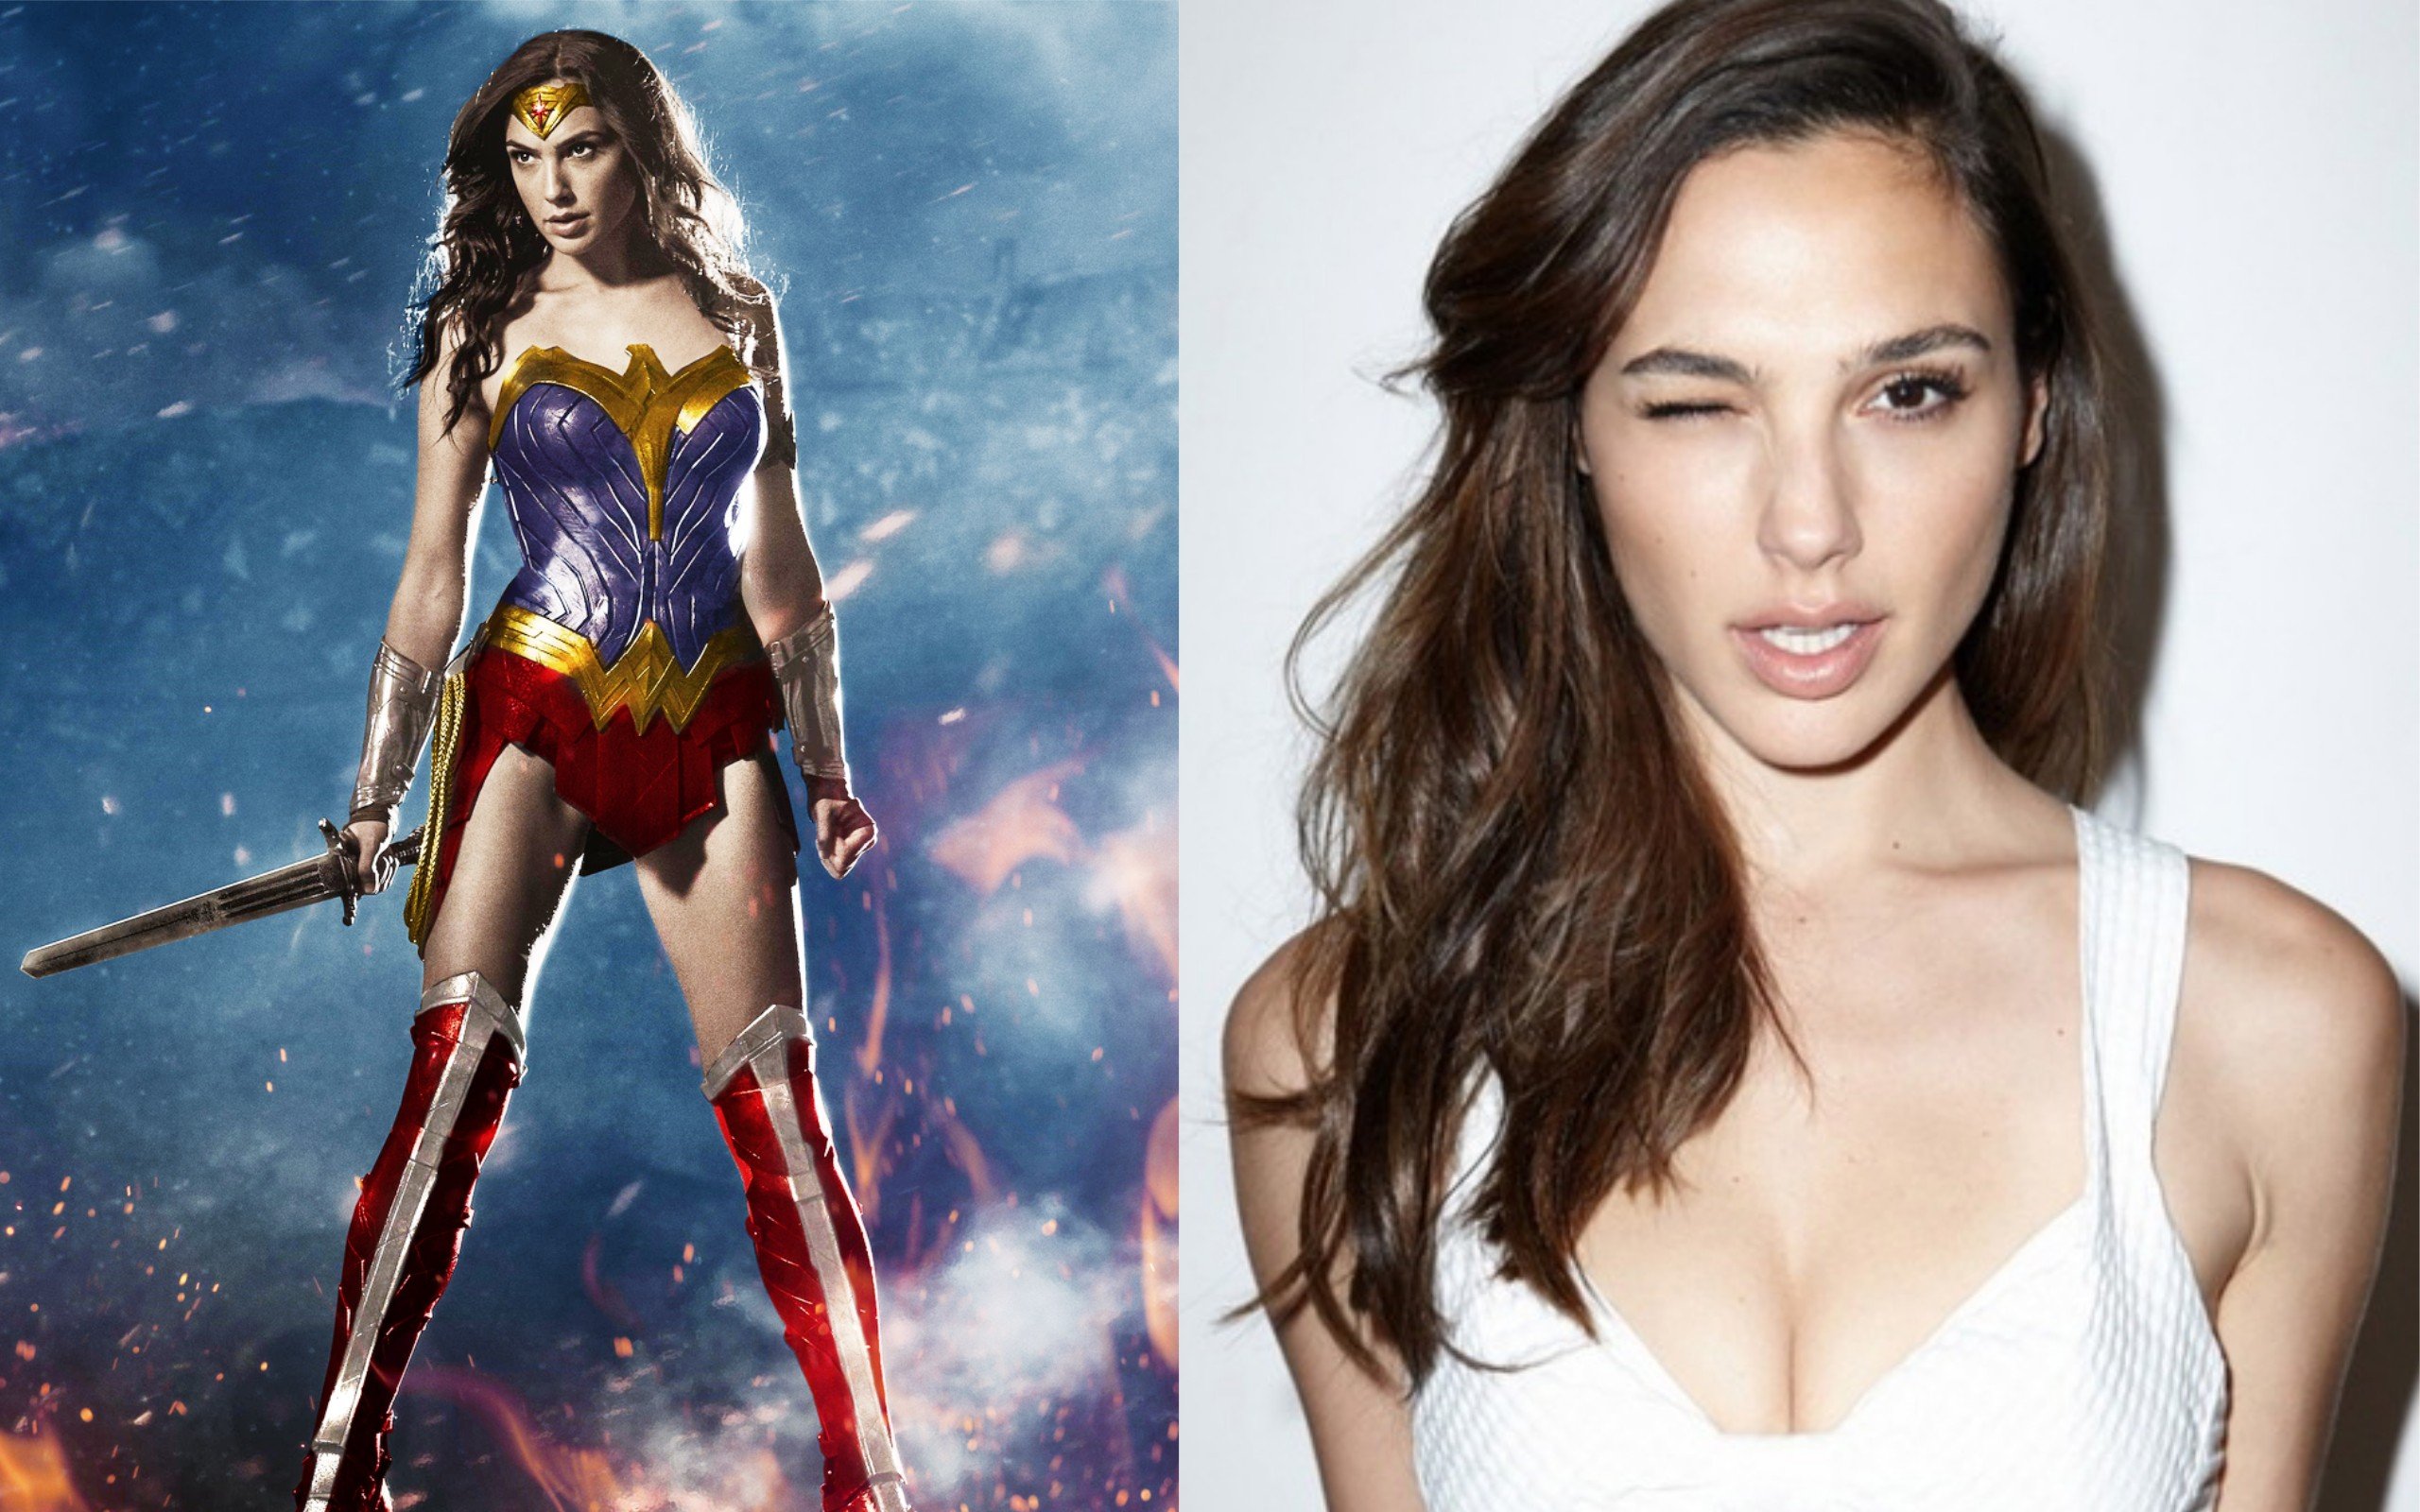 Wonder Woman: Gal Gadot's Fast and Furious costars are proud of her